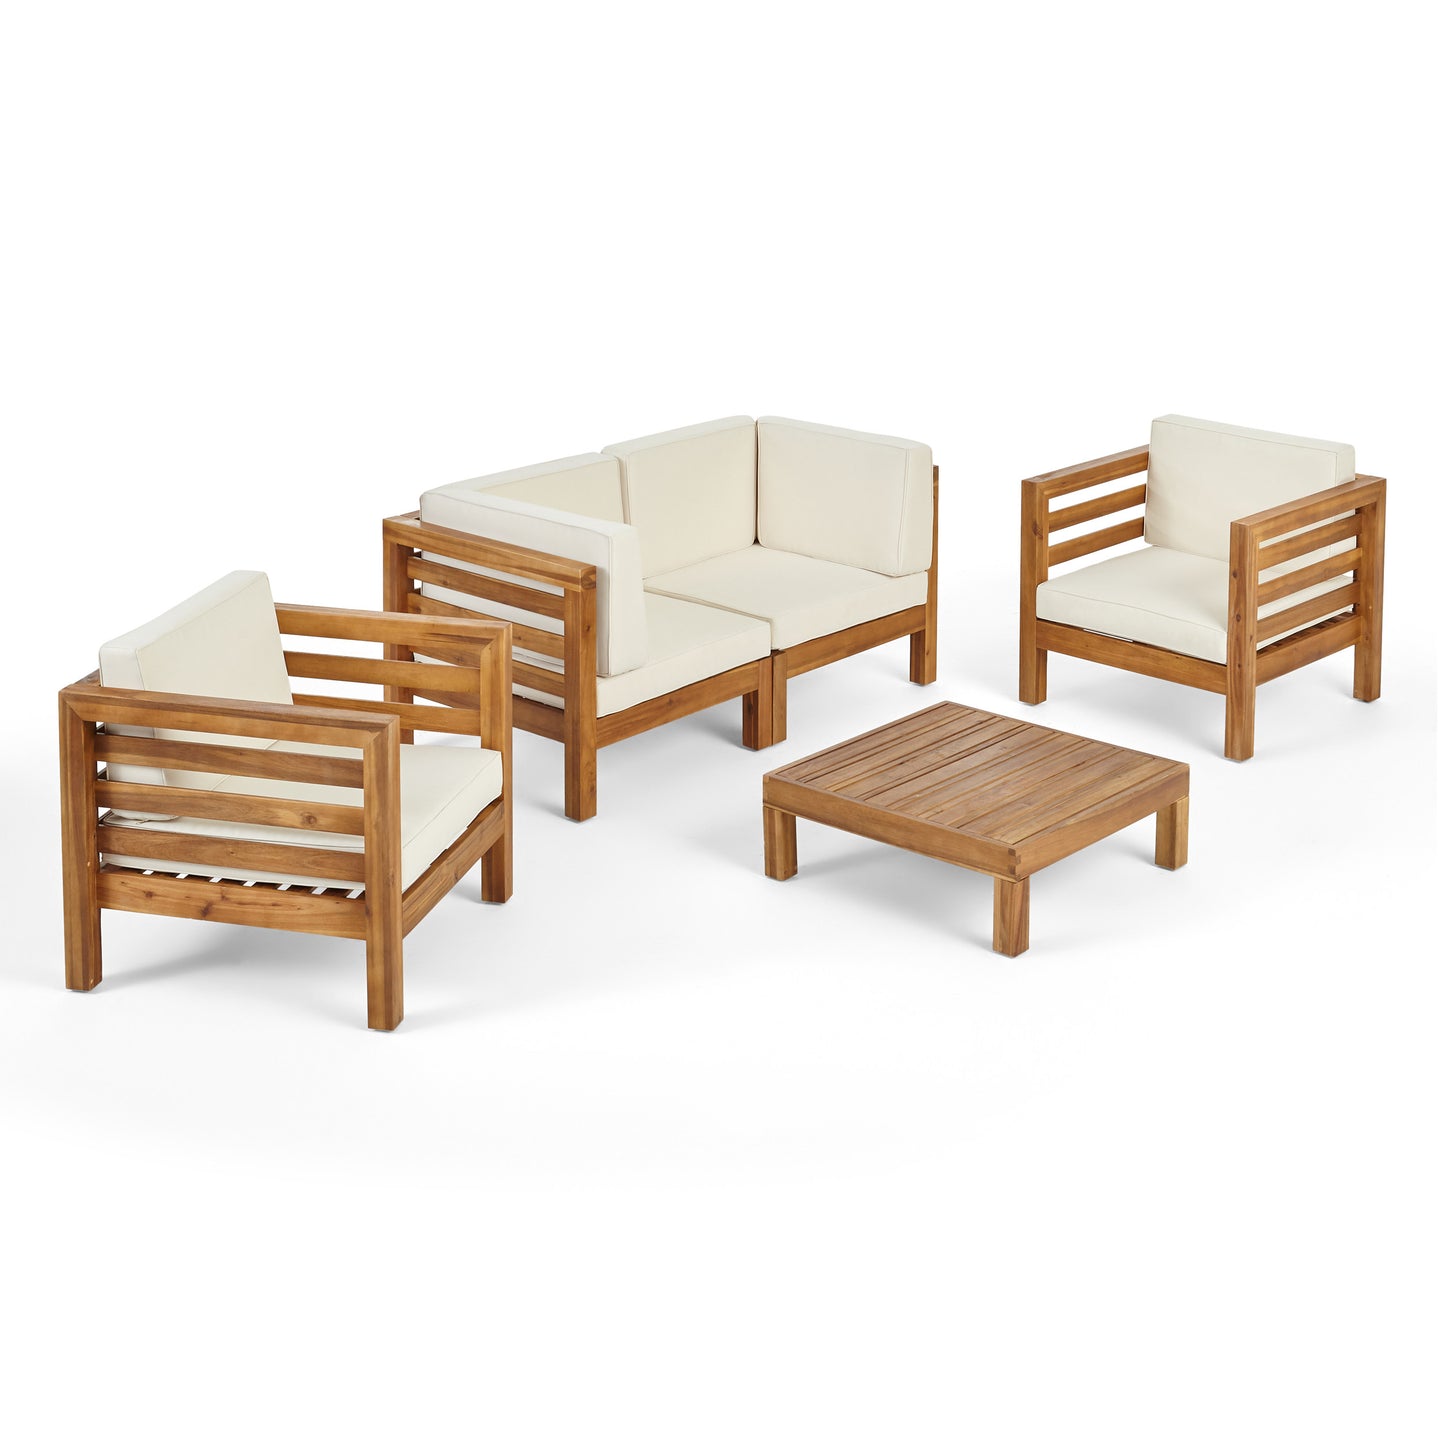 Emma Outdoor 4 Seater Acacia Wood Loveseat Chat Set